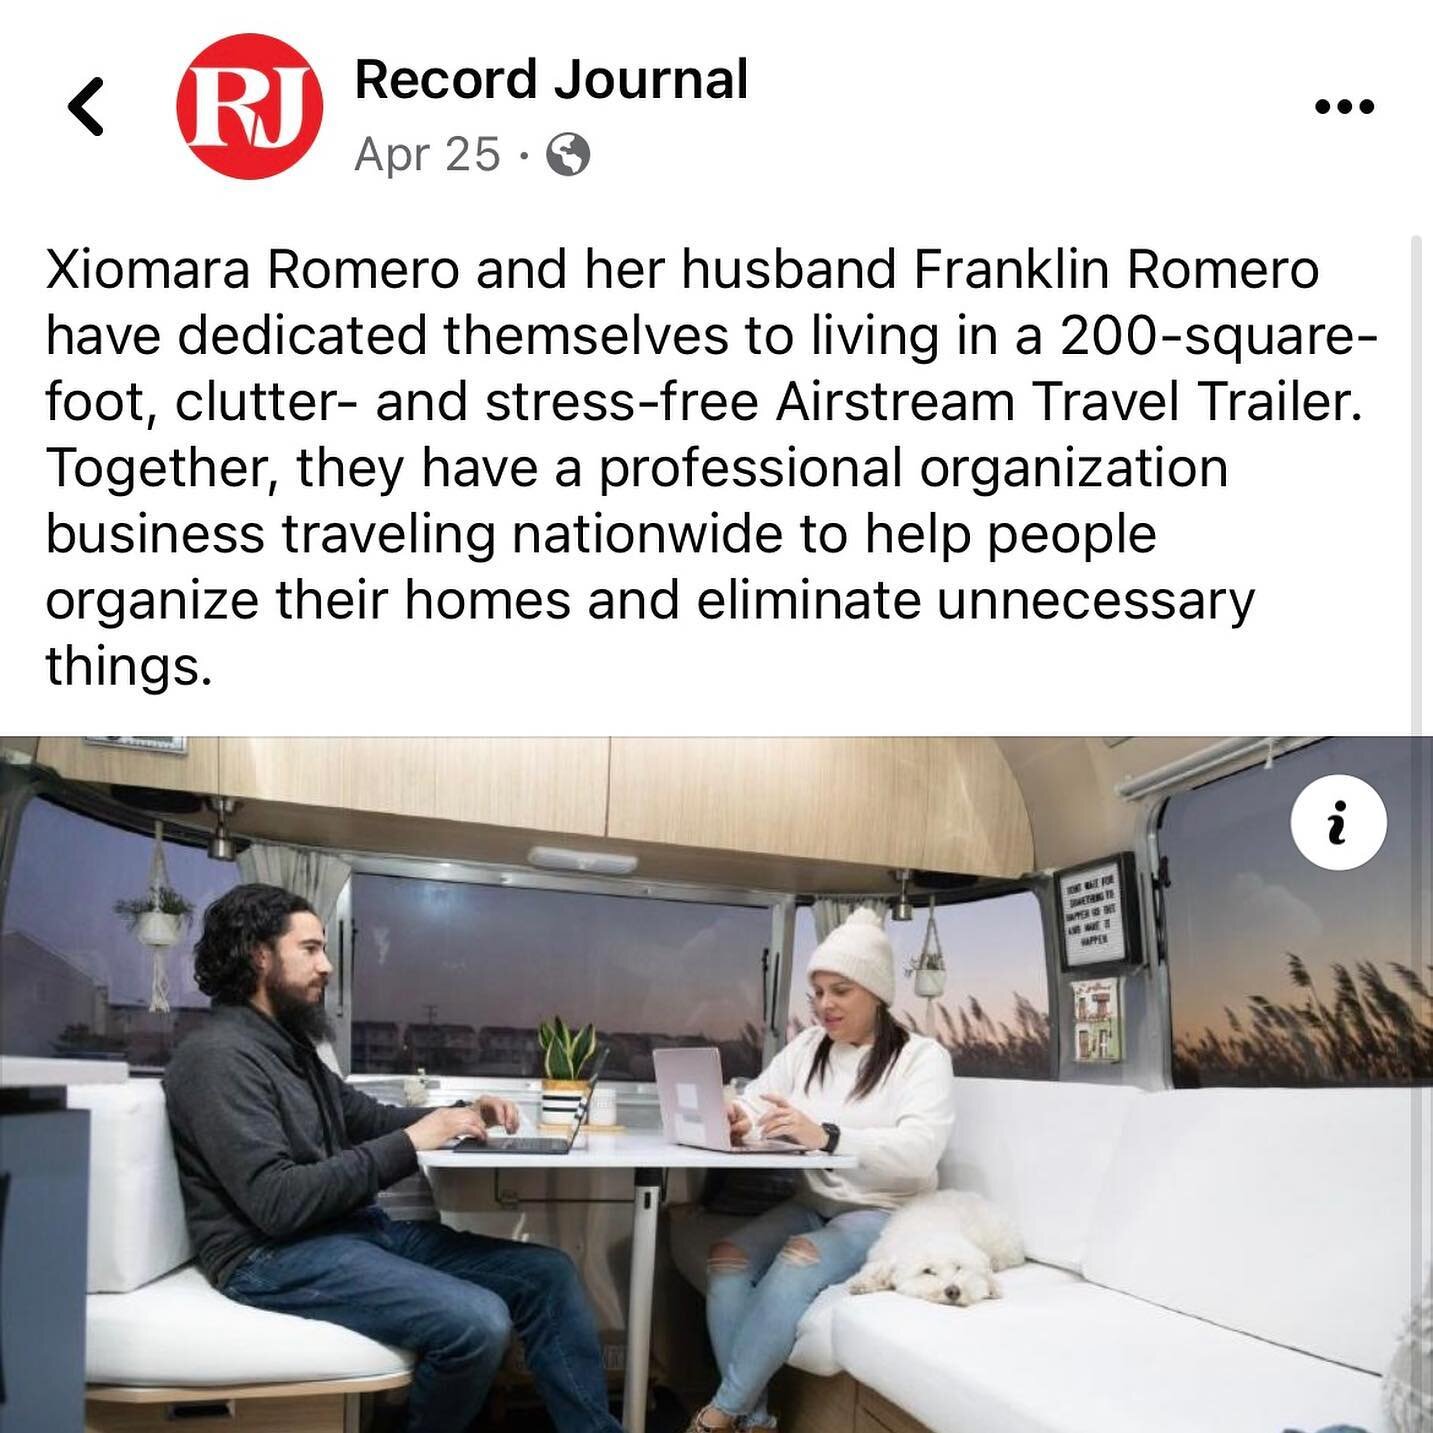 We were featured in @recordjournal 
Thank you so much David Matos &amp; Record Journal for sharing our story with your audience.  It&rsquo;s an honor to be spreading our passion for organizing and helping others around the country achieve harmony in 